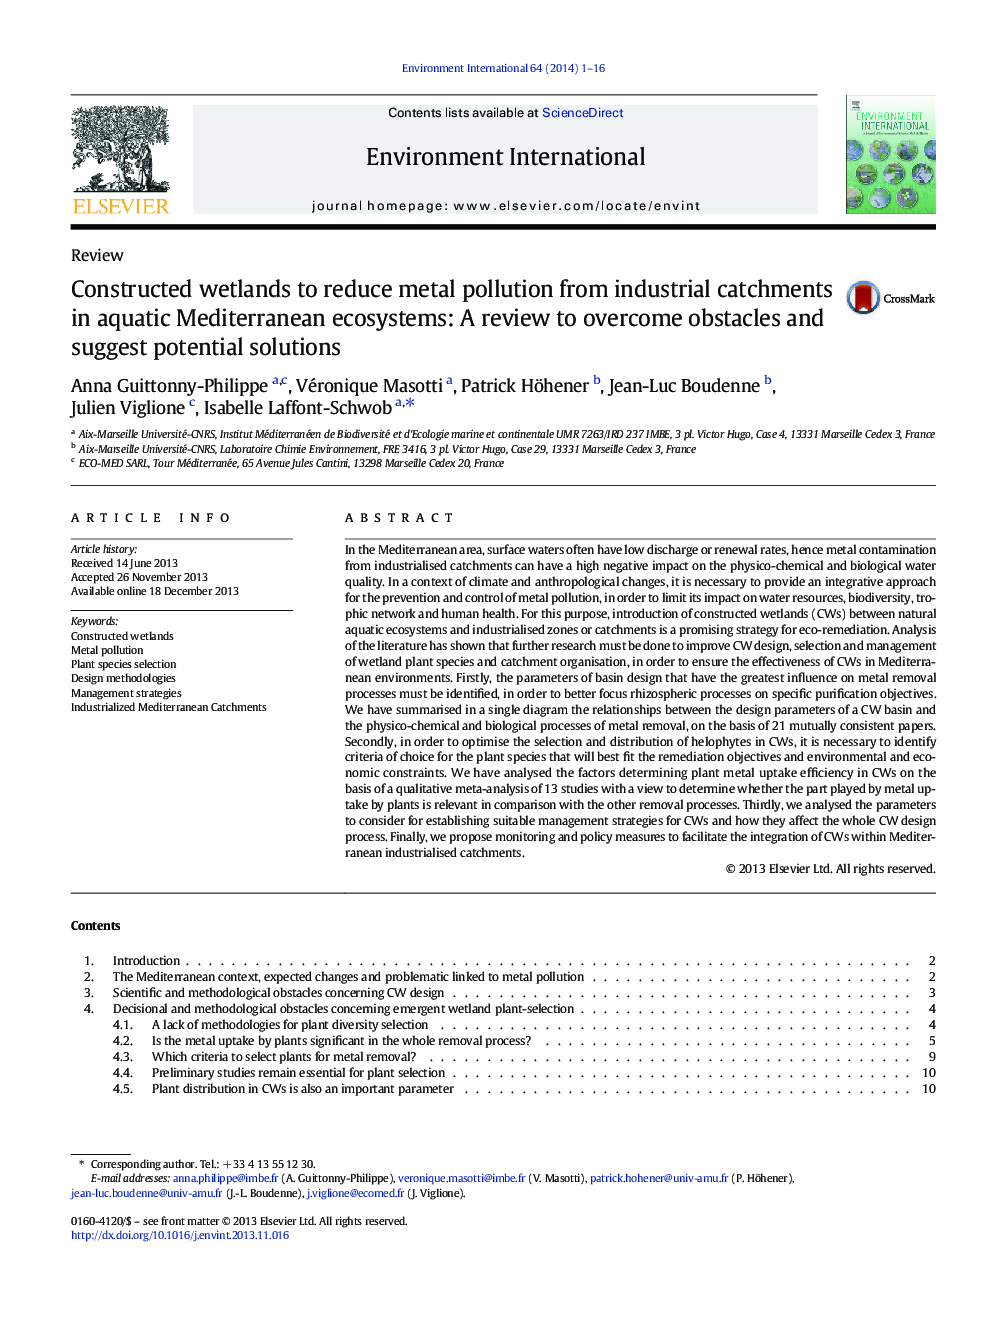 Constructed wetlands to reduce metal pollution from industrial catchments in aquatic Mediterranean ecosystems: A review to overcome obstacles and suggest potential solutions